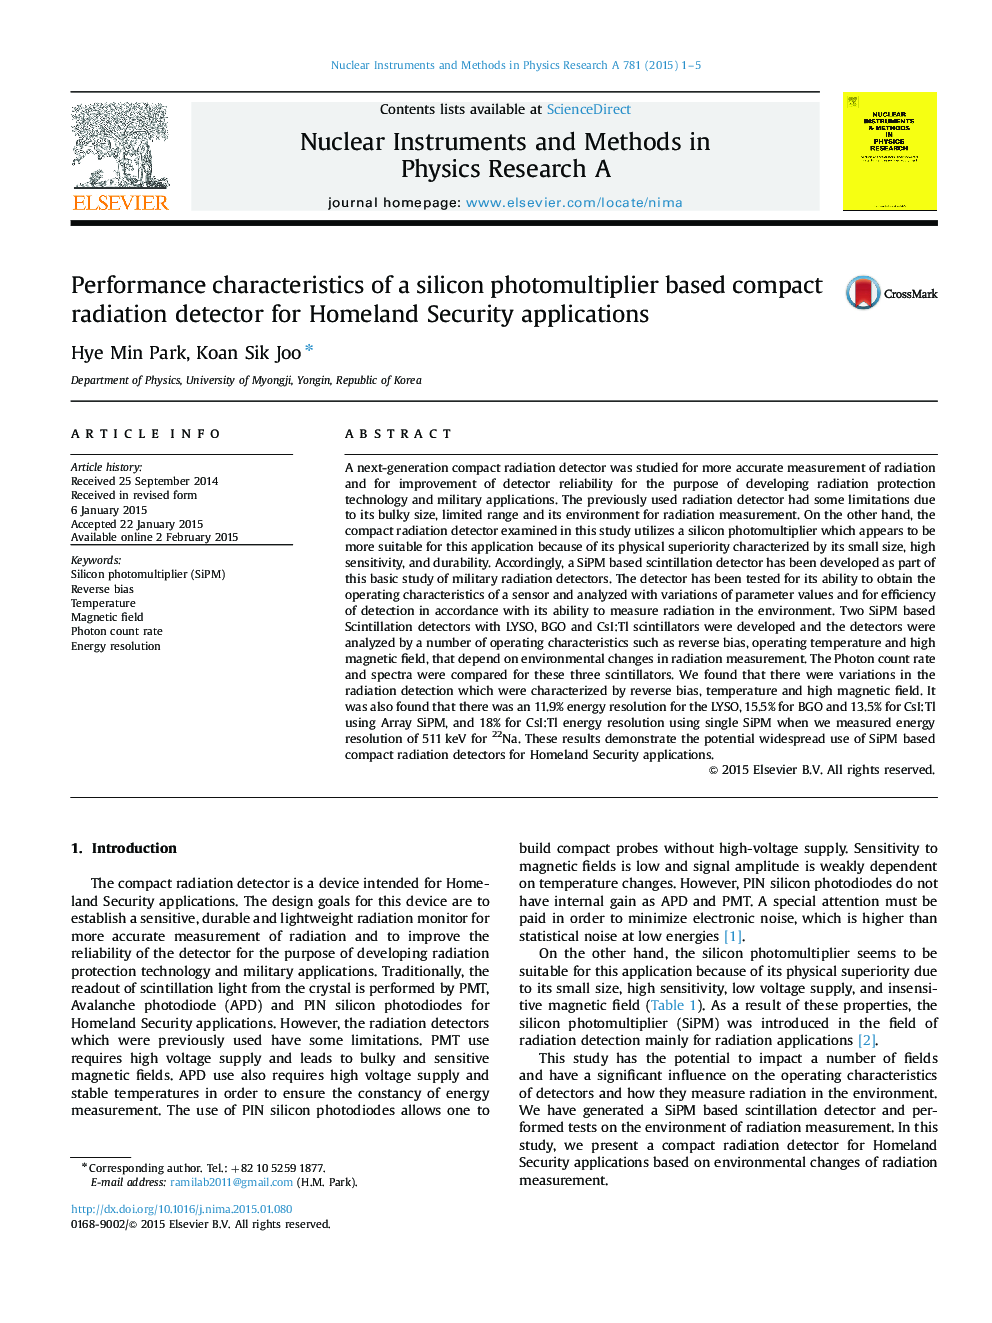 Performance characteristics of a silicon photomultiplier based compact radiation detector for Homeland Security applications